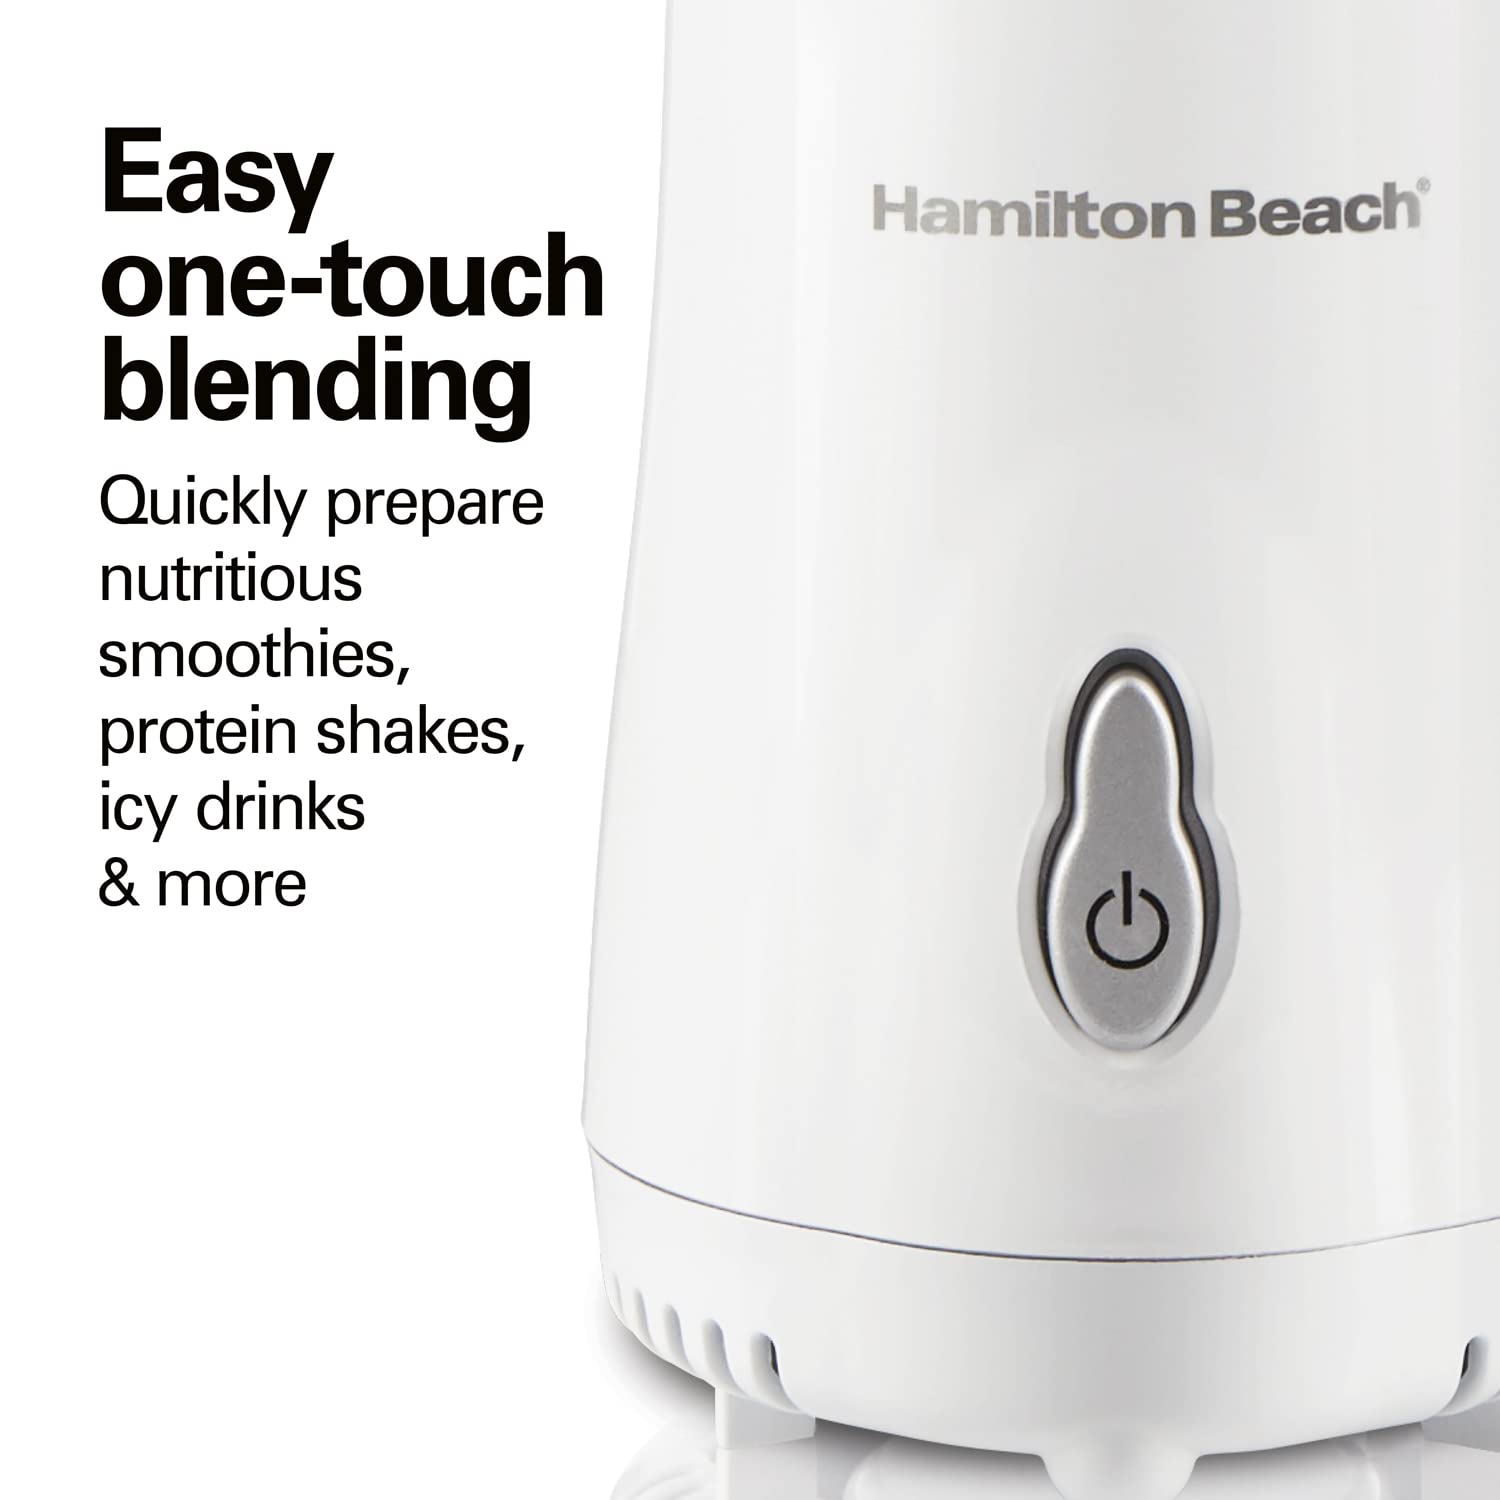 Hamilton Beach Portable Blender for Shakes and Smoothies with 14 Oz BPA Free Travel Cup and Lid, Durable Stainless Steel Blades for Powerful Blending Performance, White ( 51101V)